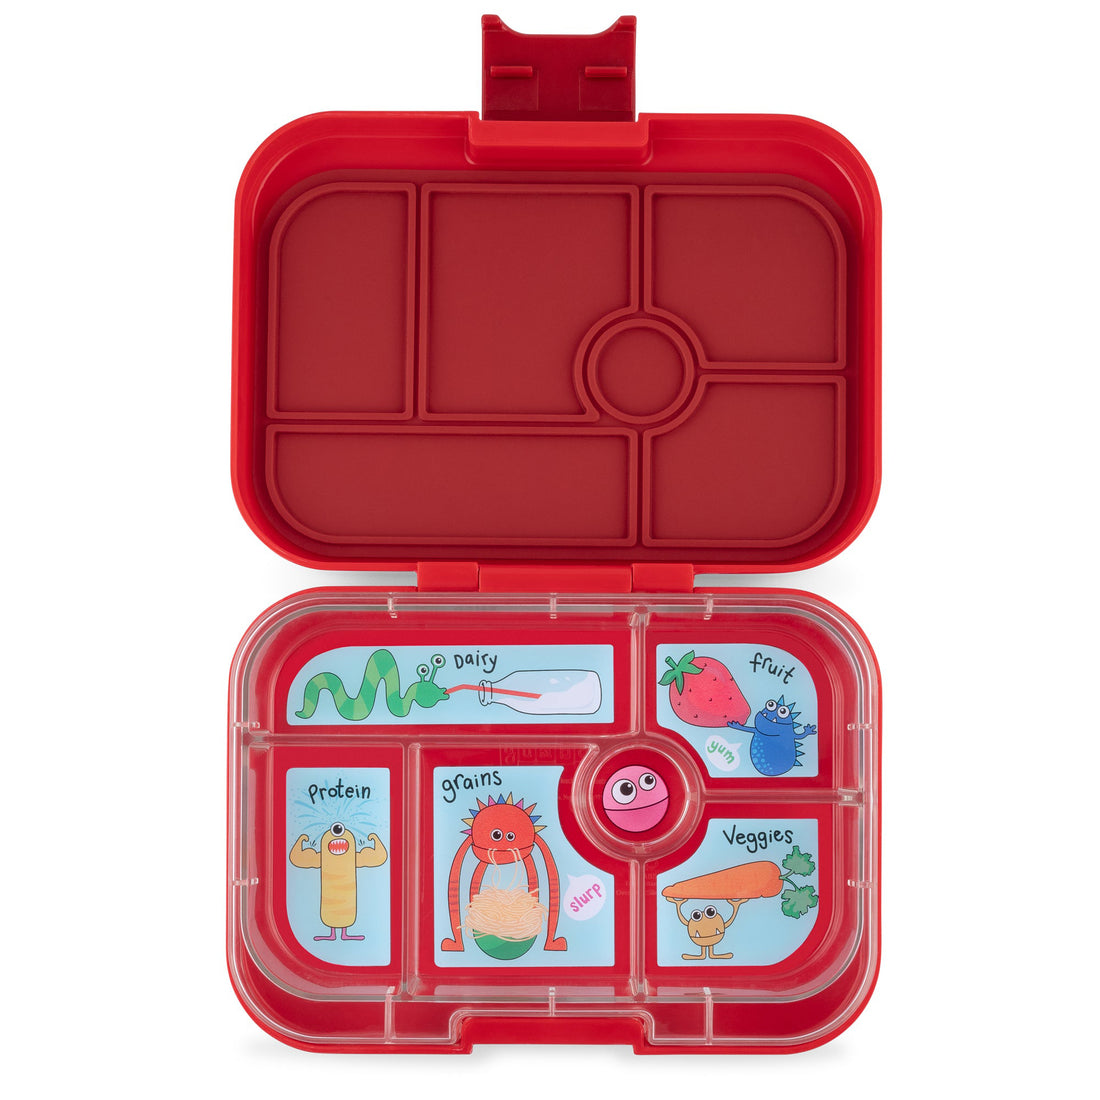 yumbox-original-6-compartment-lunch-box-wow-red-funny-monsters-yumb-wri202010f- (1)